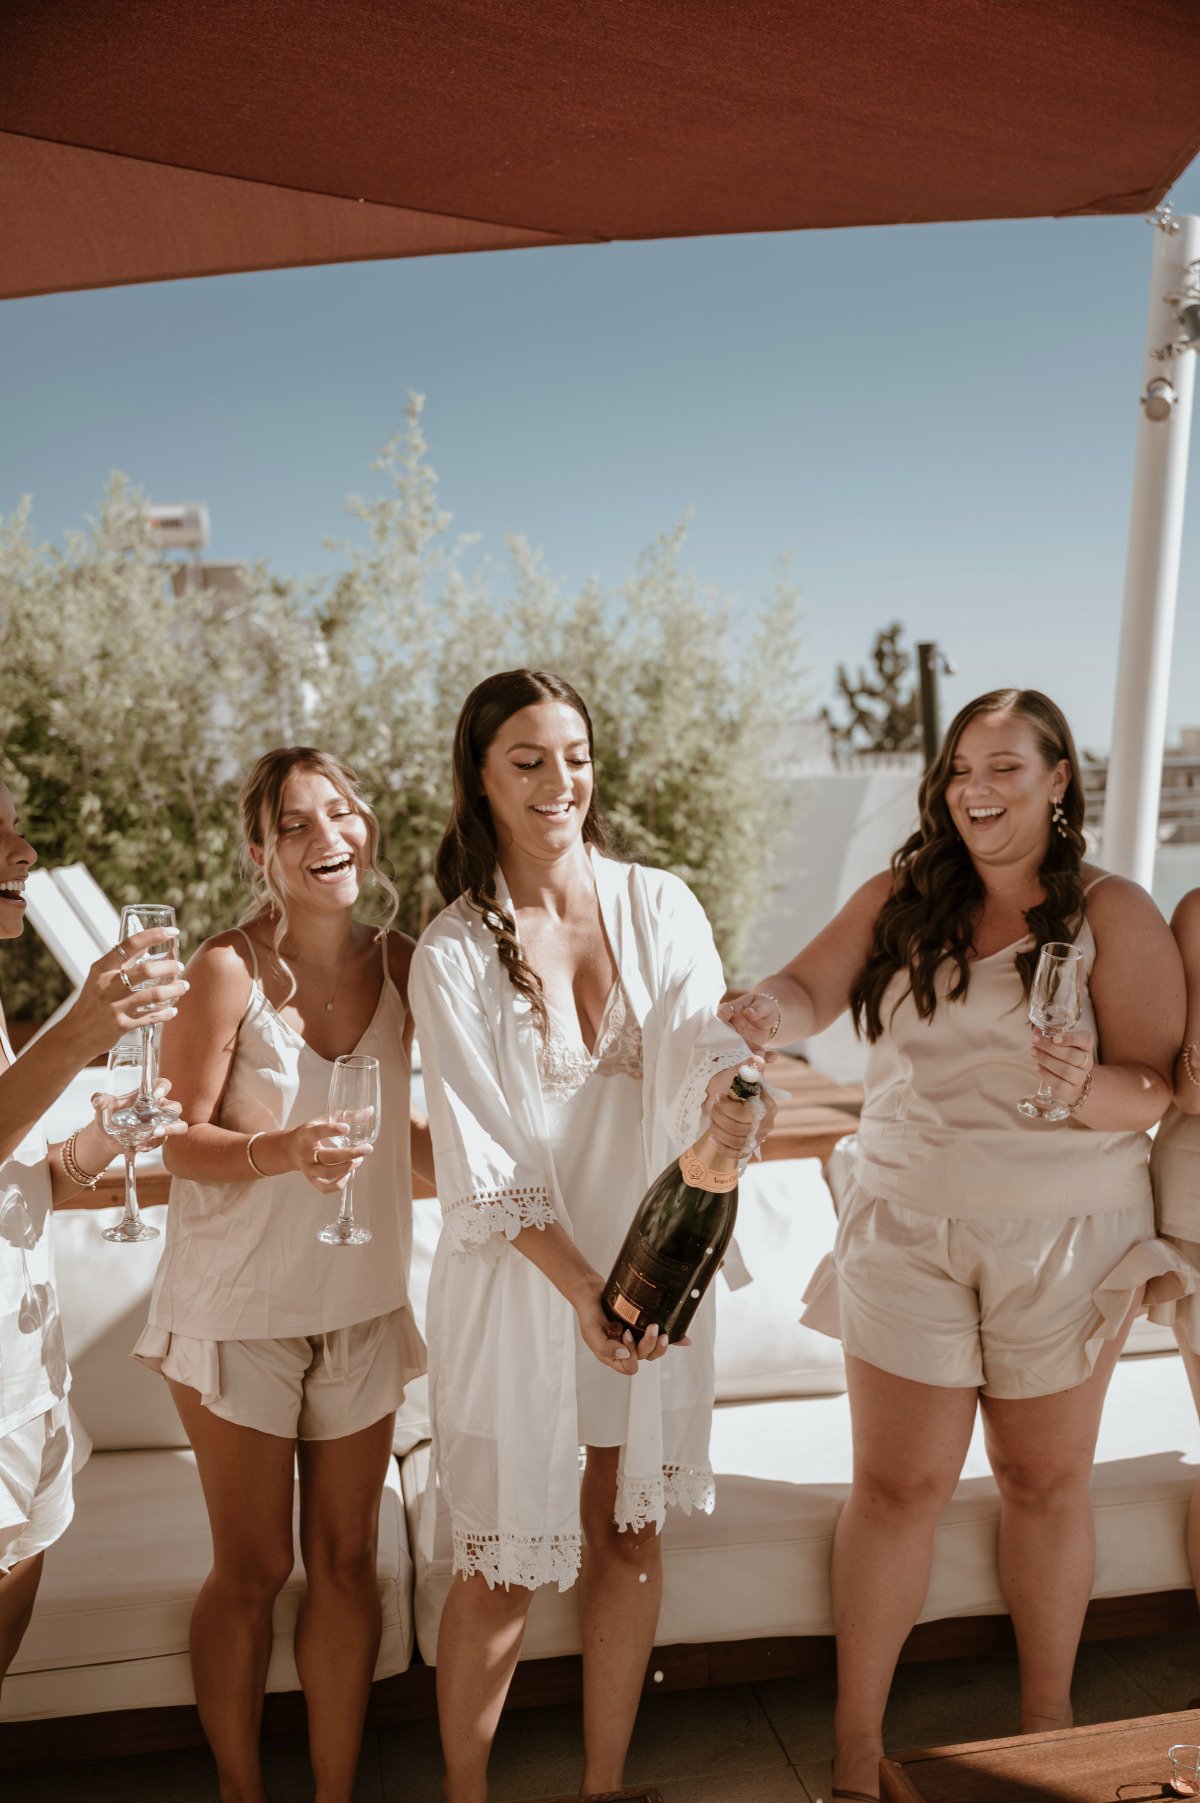 Bride popping champagne bottle with bridesmaids in matching camis and shorts